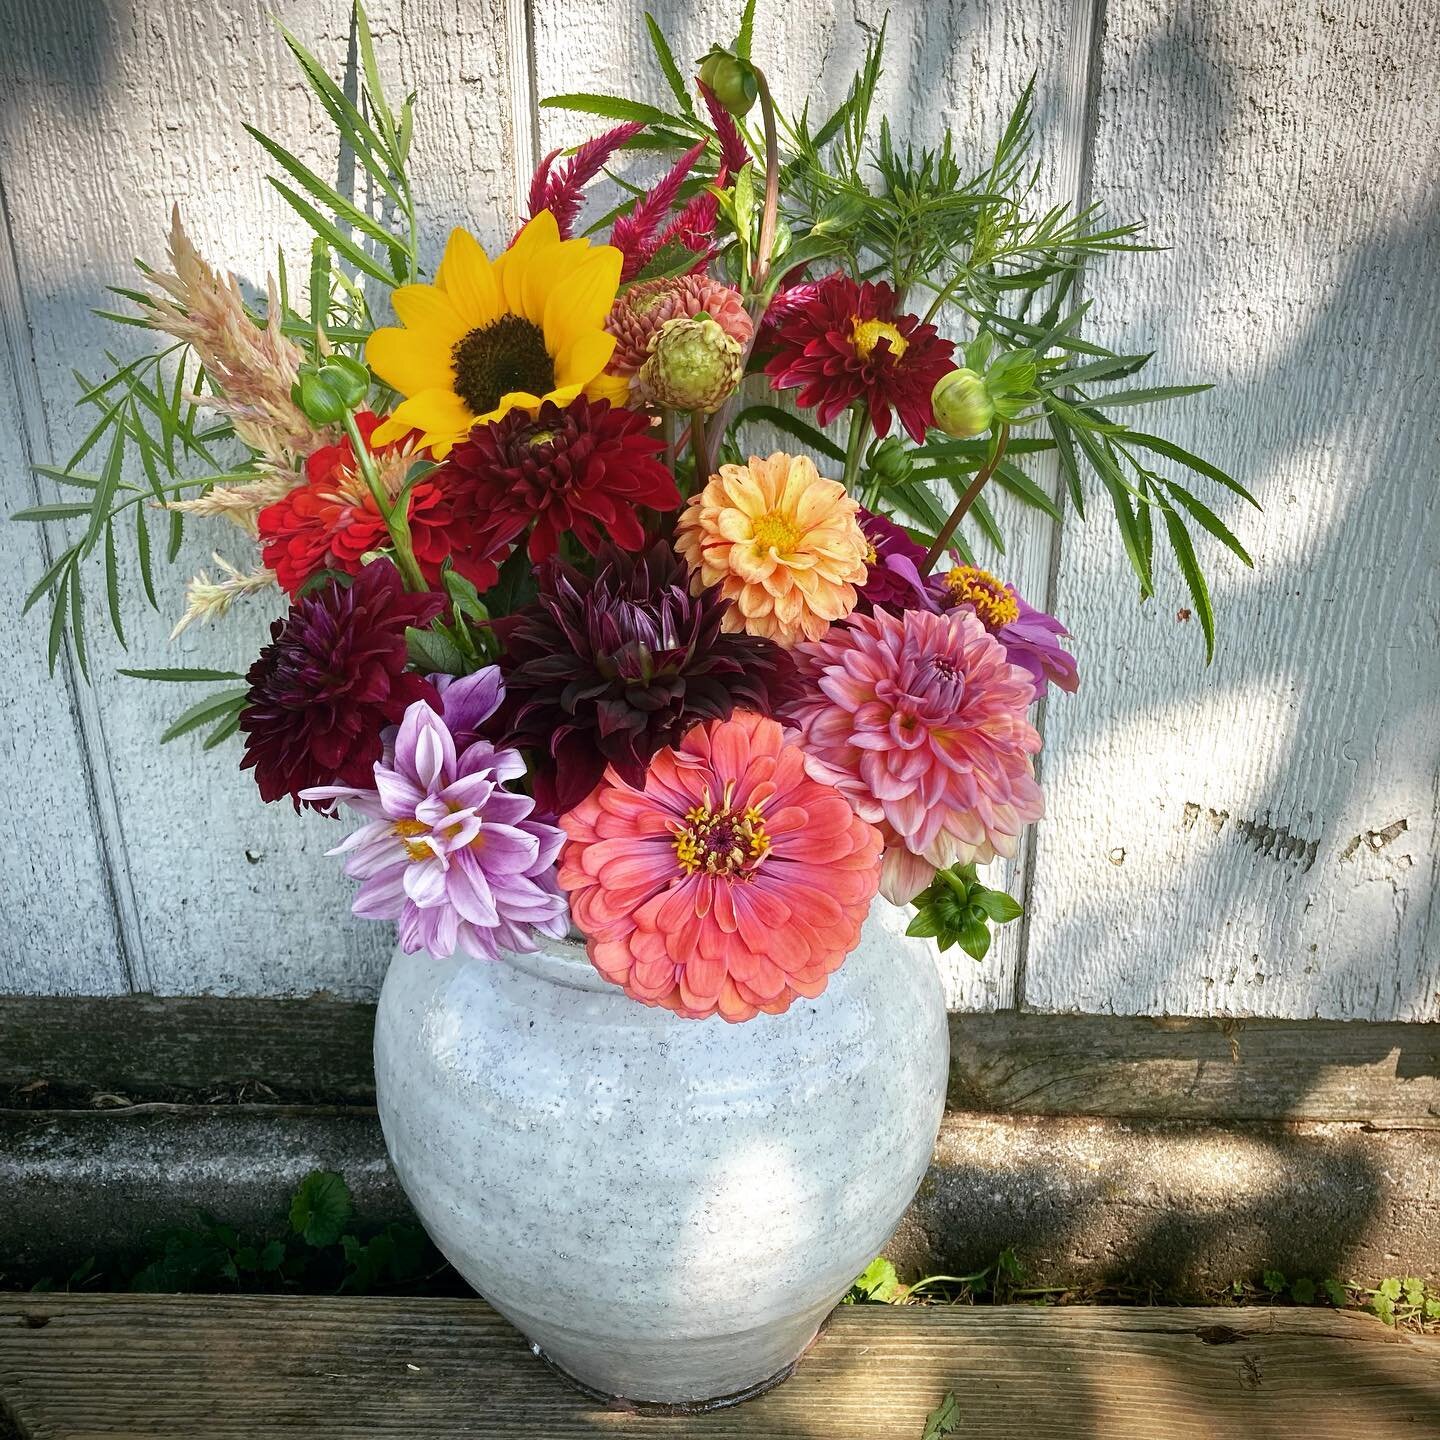 Truelove Seed&rsquo;s Philly Flower Share sign ups are live, and we&rsquo;re offering an EARLY BIRD DISCOUNT of 10% off (that&rsquo;s one free week of flowers!) of our ten-week-long cut flower subscription. Sign up today, as this discount expires Sat